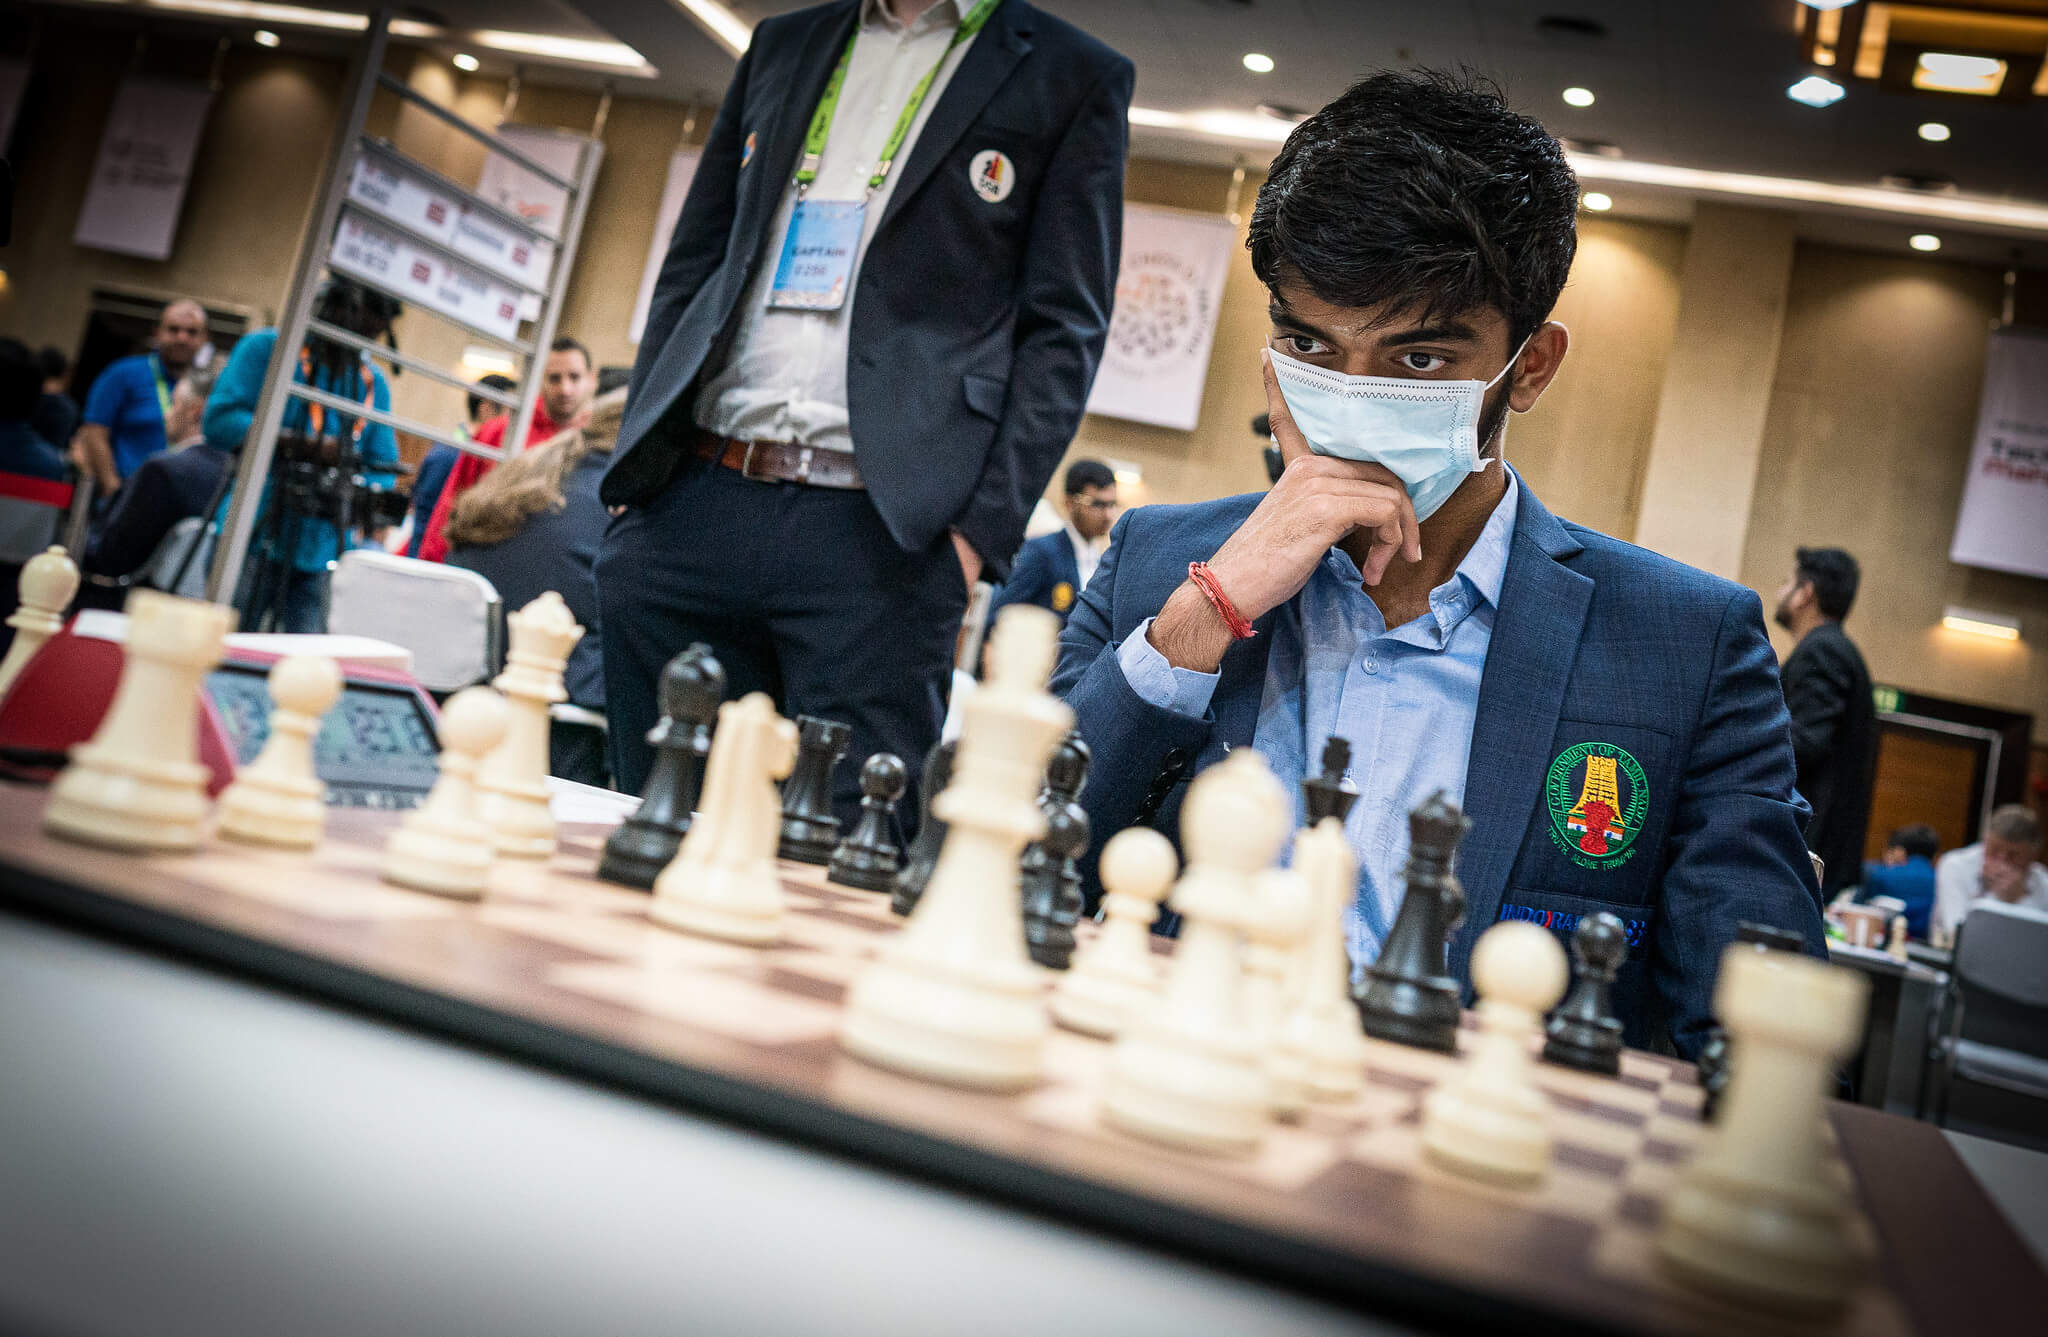 He is not the only one crying”, Chess Olympiad 2022 is over